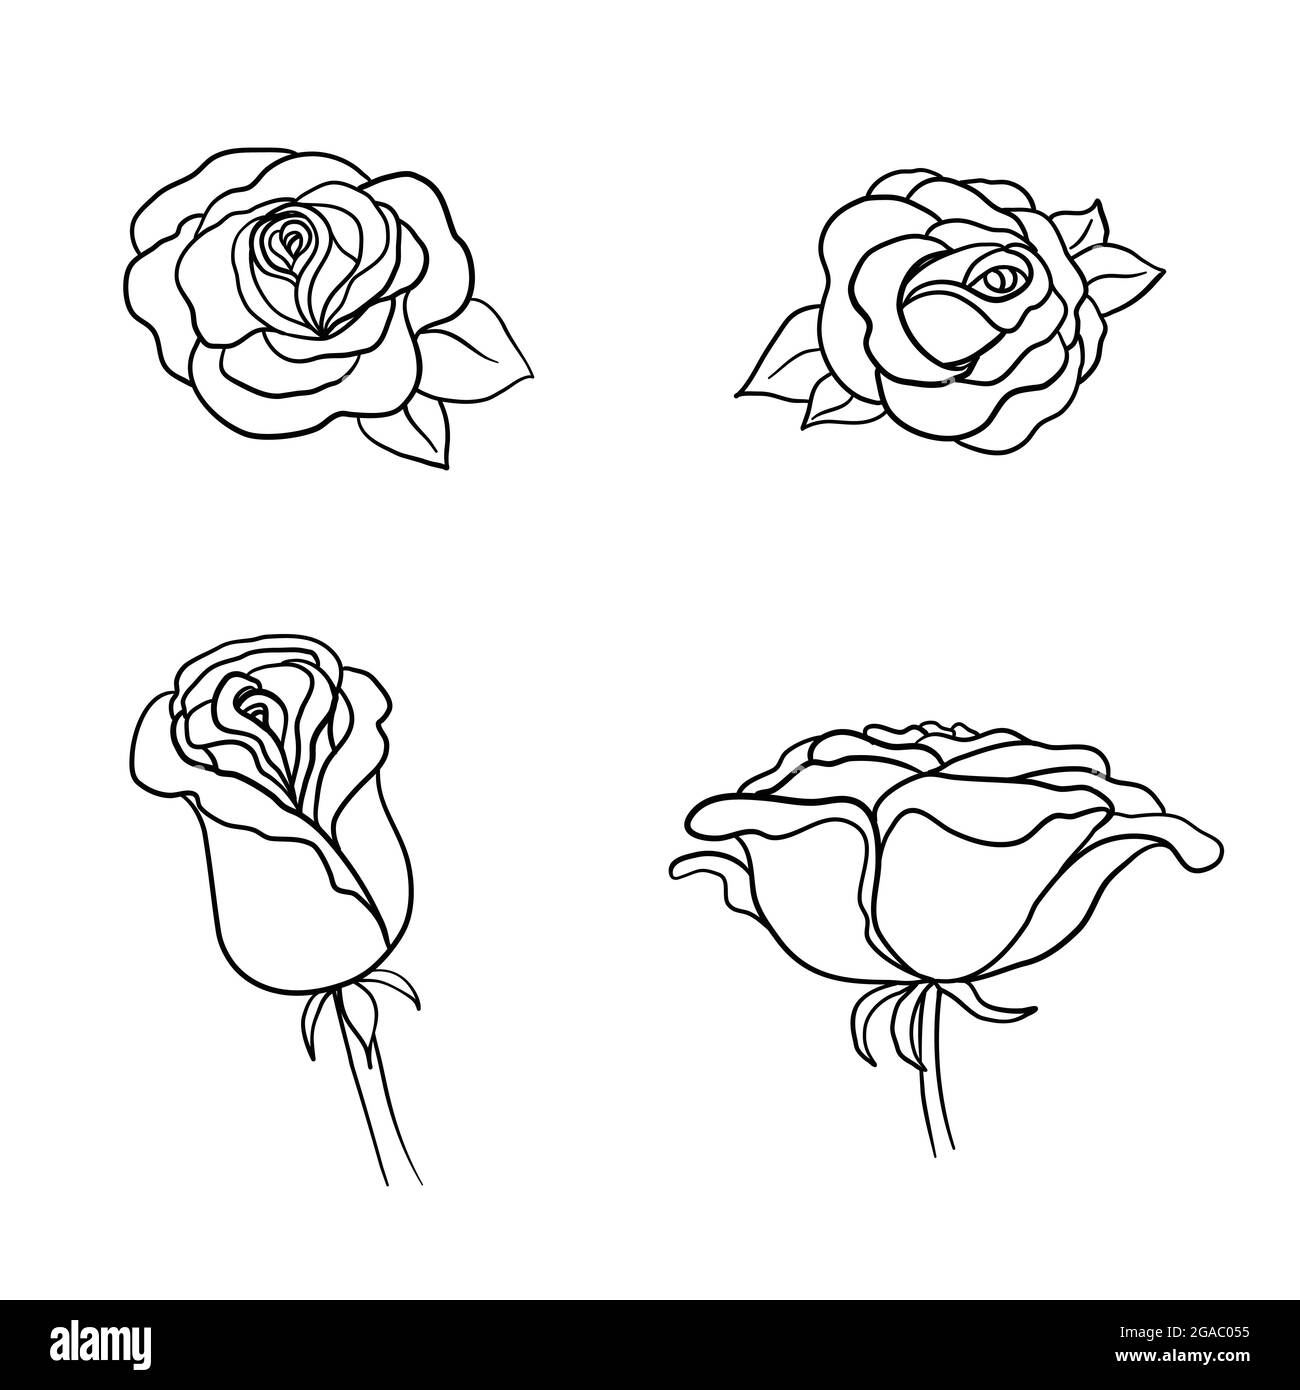 105,564 Sketch Flowers Pencil Images, Stock Photos, 3D objects, & Vectors |  Shutterstock